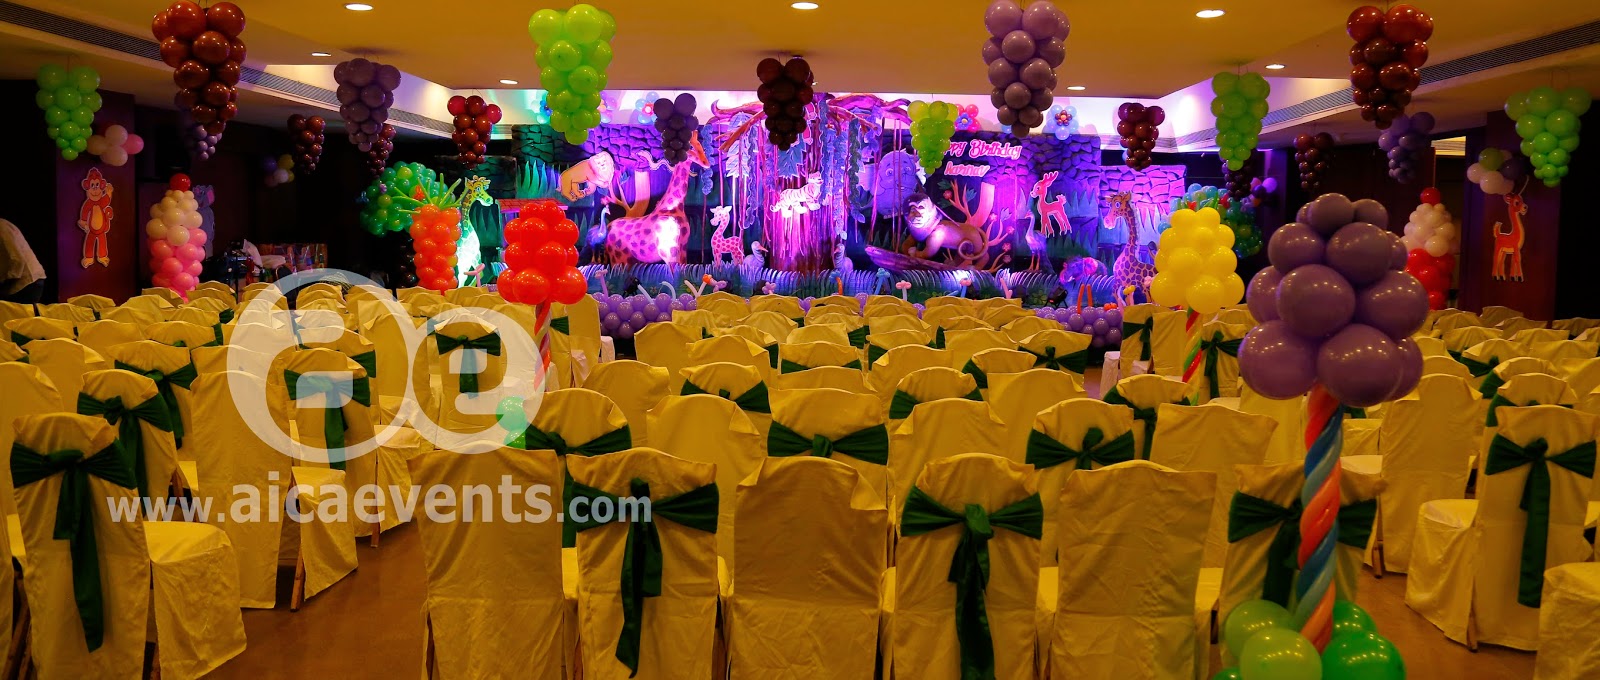 Aicaevents India  Jungle Theme Birthday  party  Decorations 